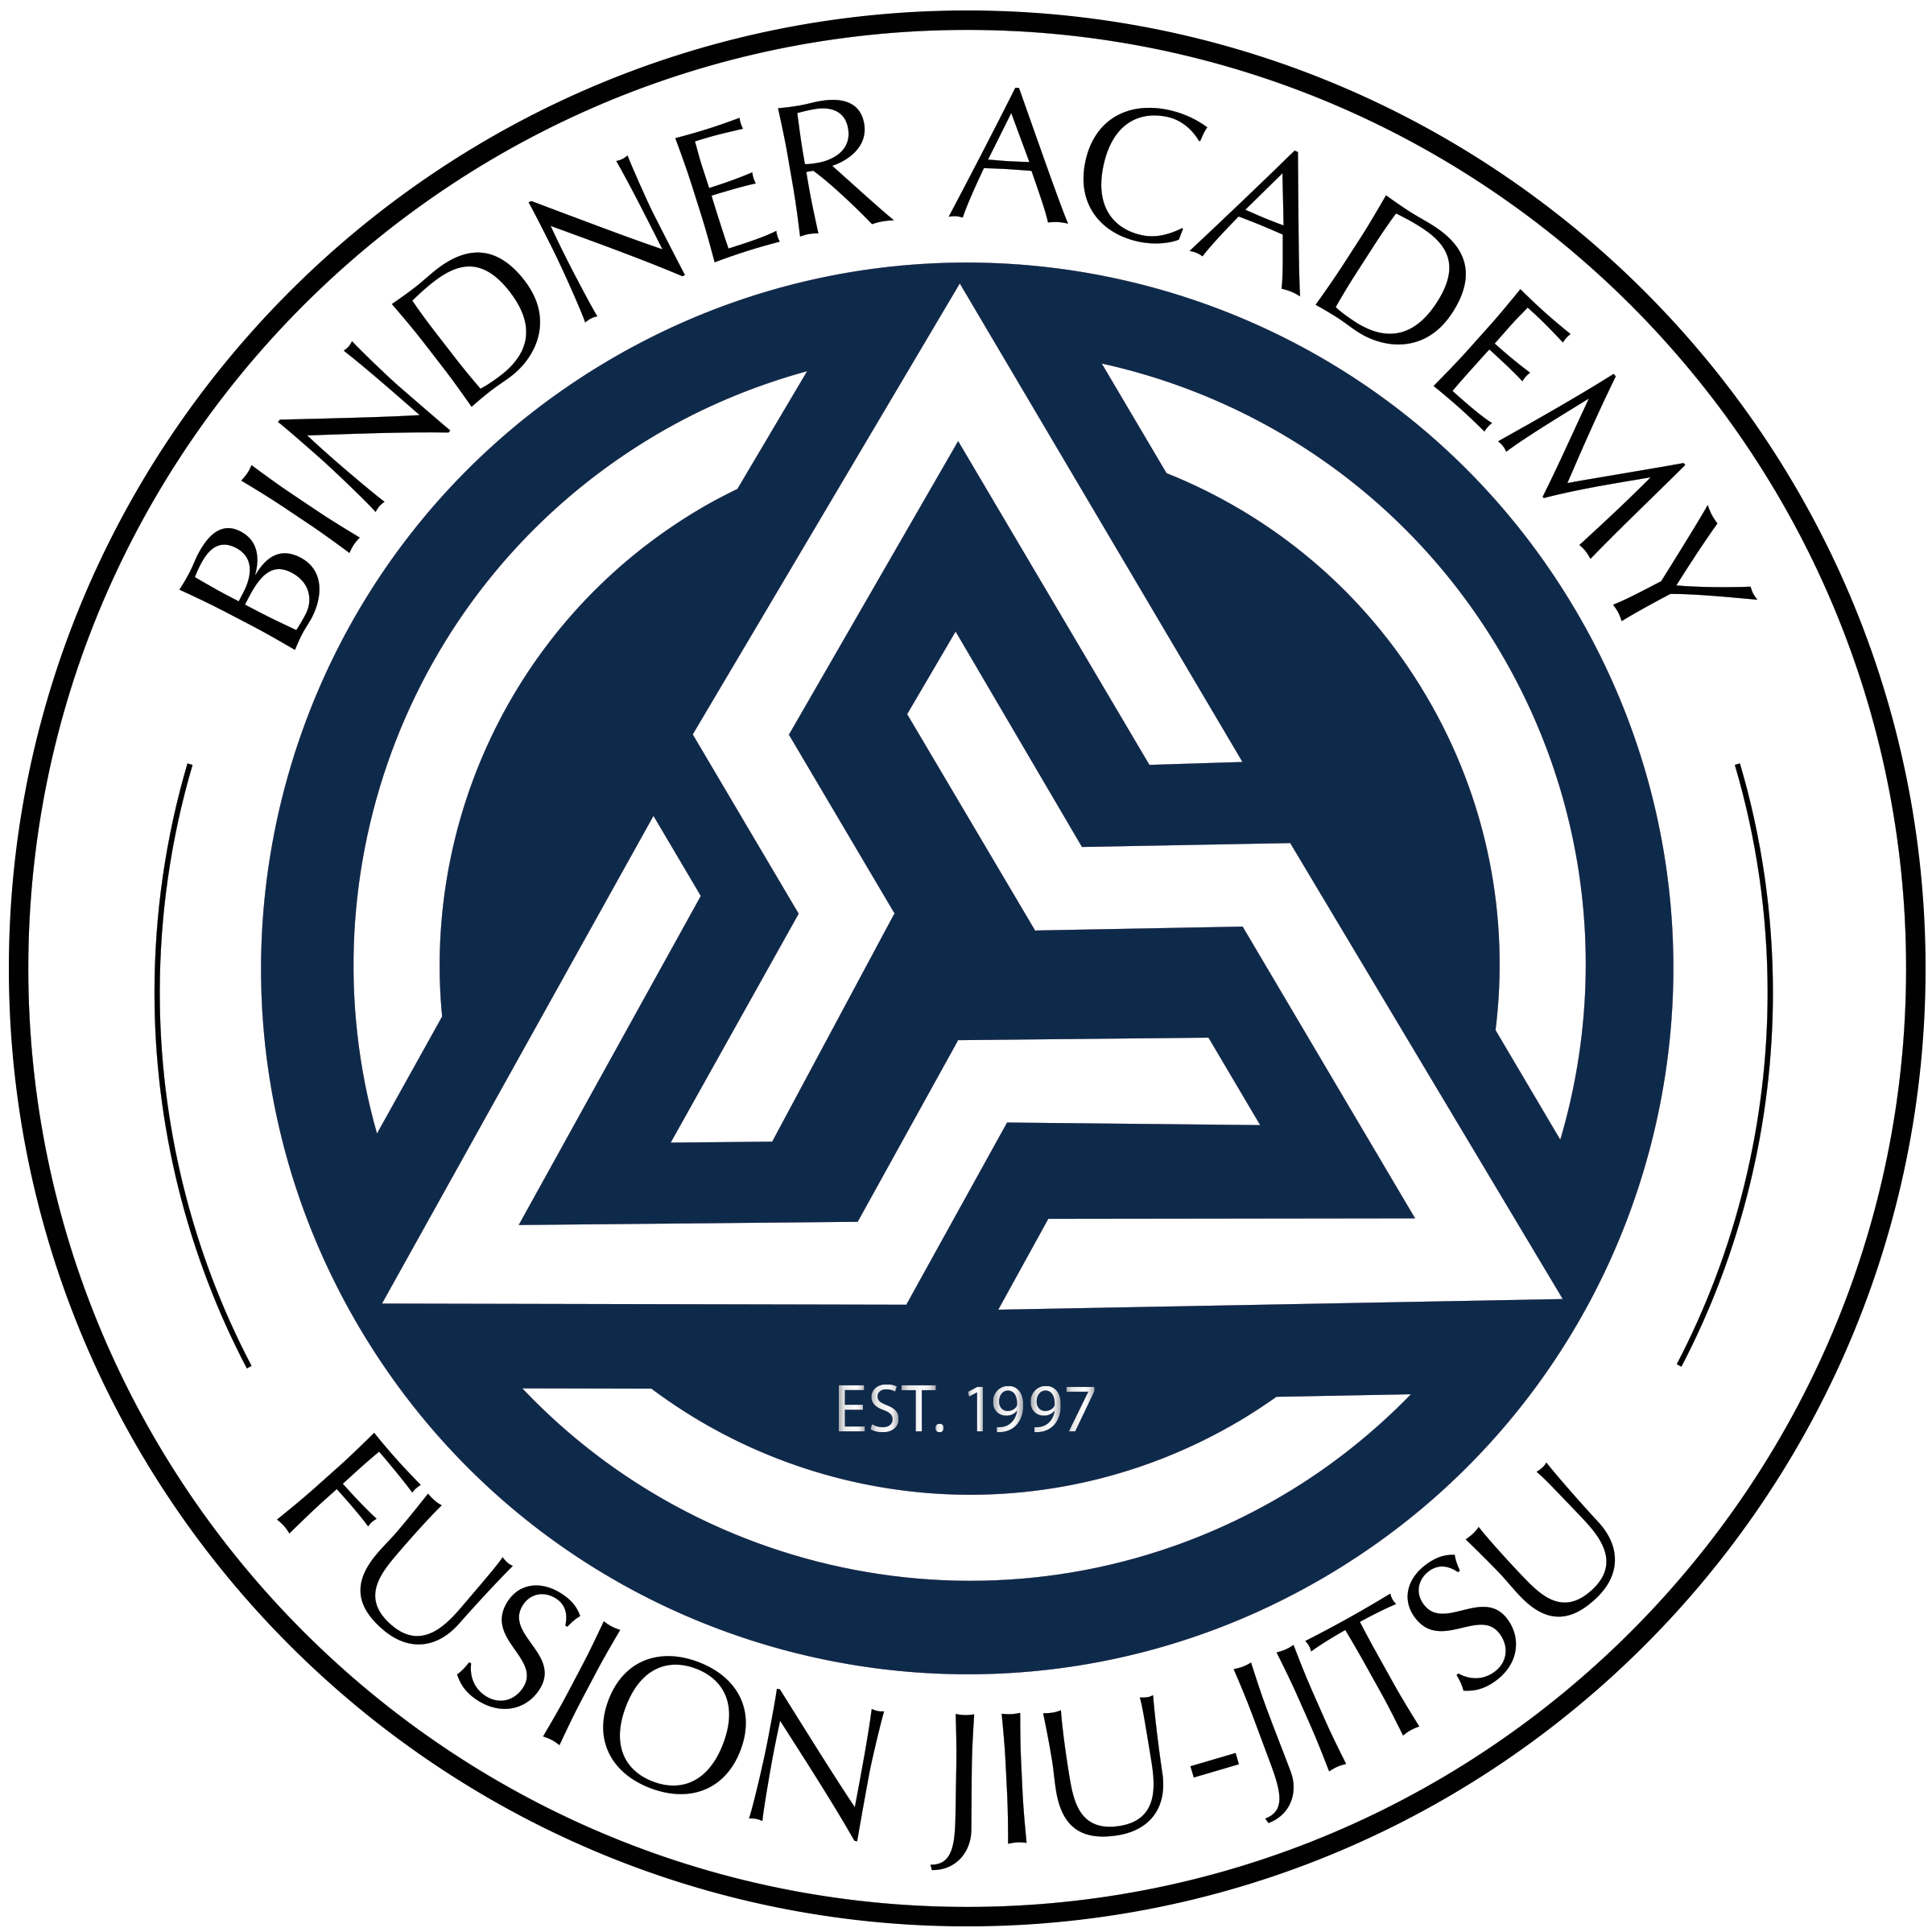 Confidence with Sophistication - Bindner Academy